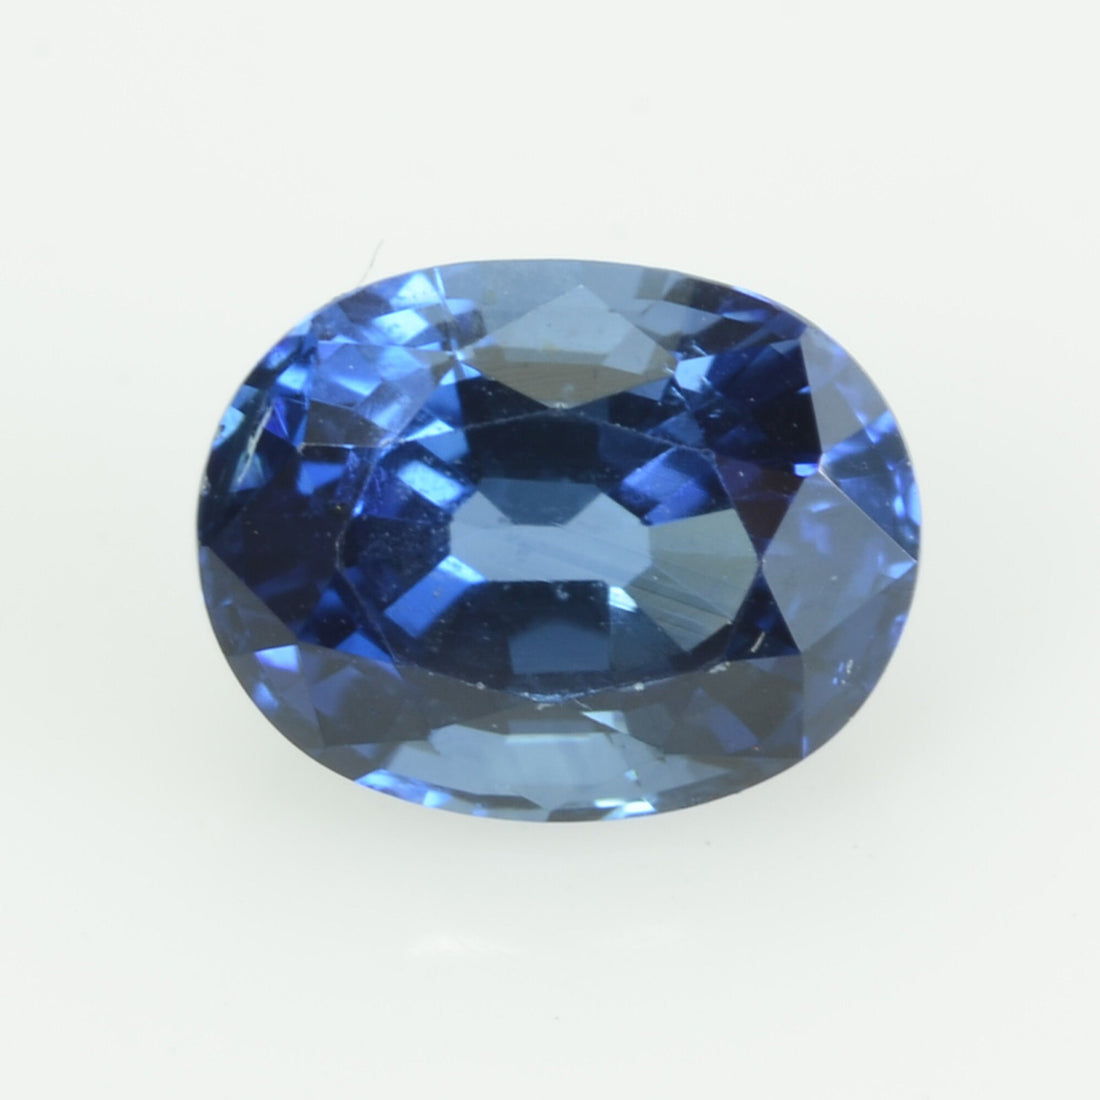 1.07 Cts Natural Blue Sapphire Loose Gemstone Oval Cut AGL Certified